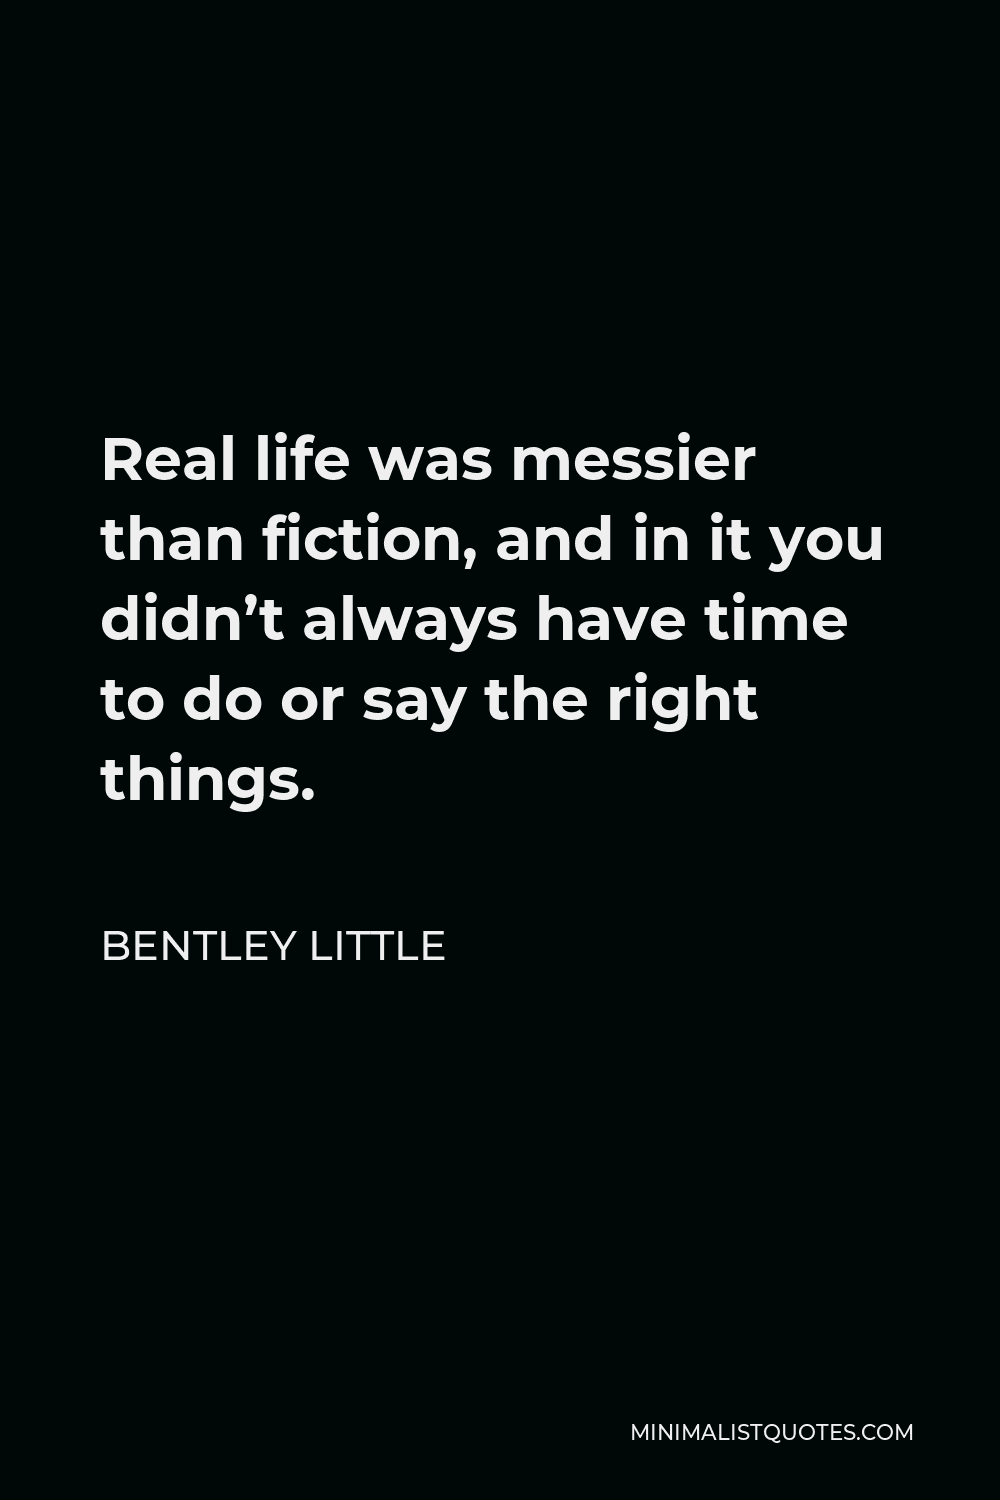 Bentley Little Quote - Real life was messier than fiction, and in it you didn’t always have time to do or say the right things.